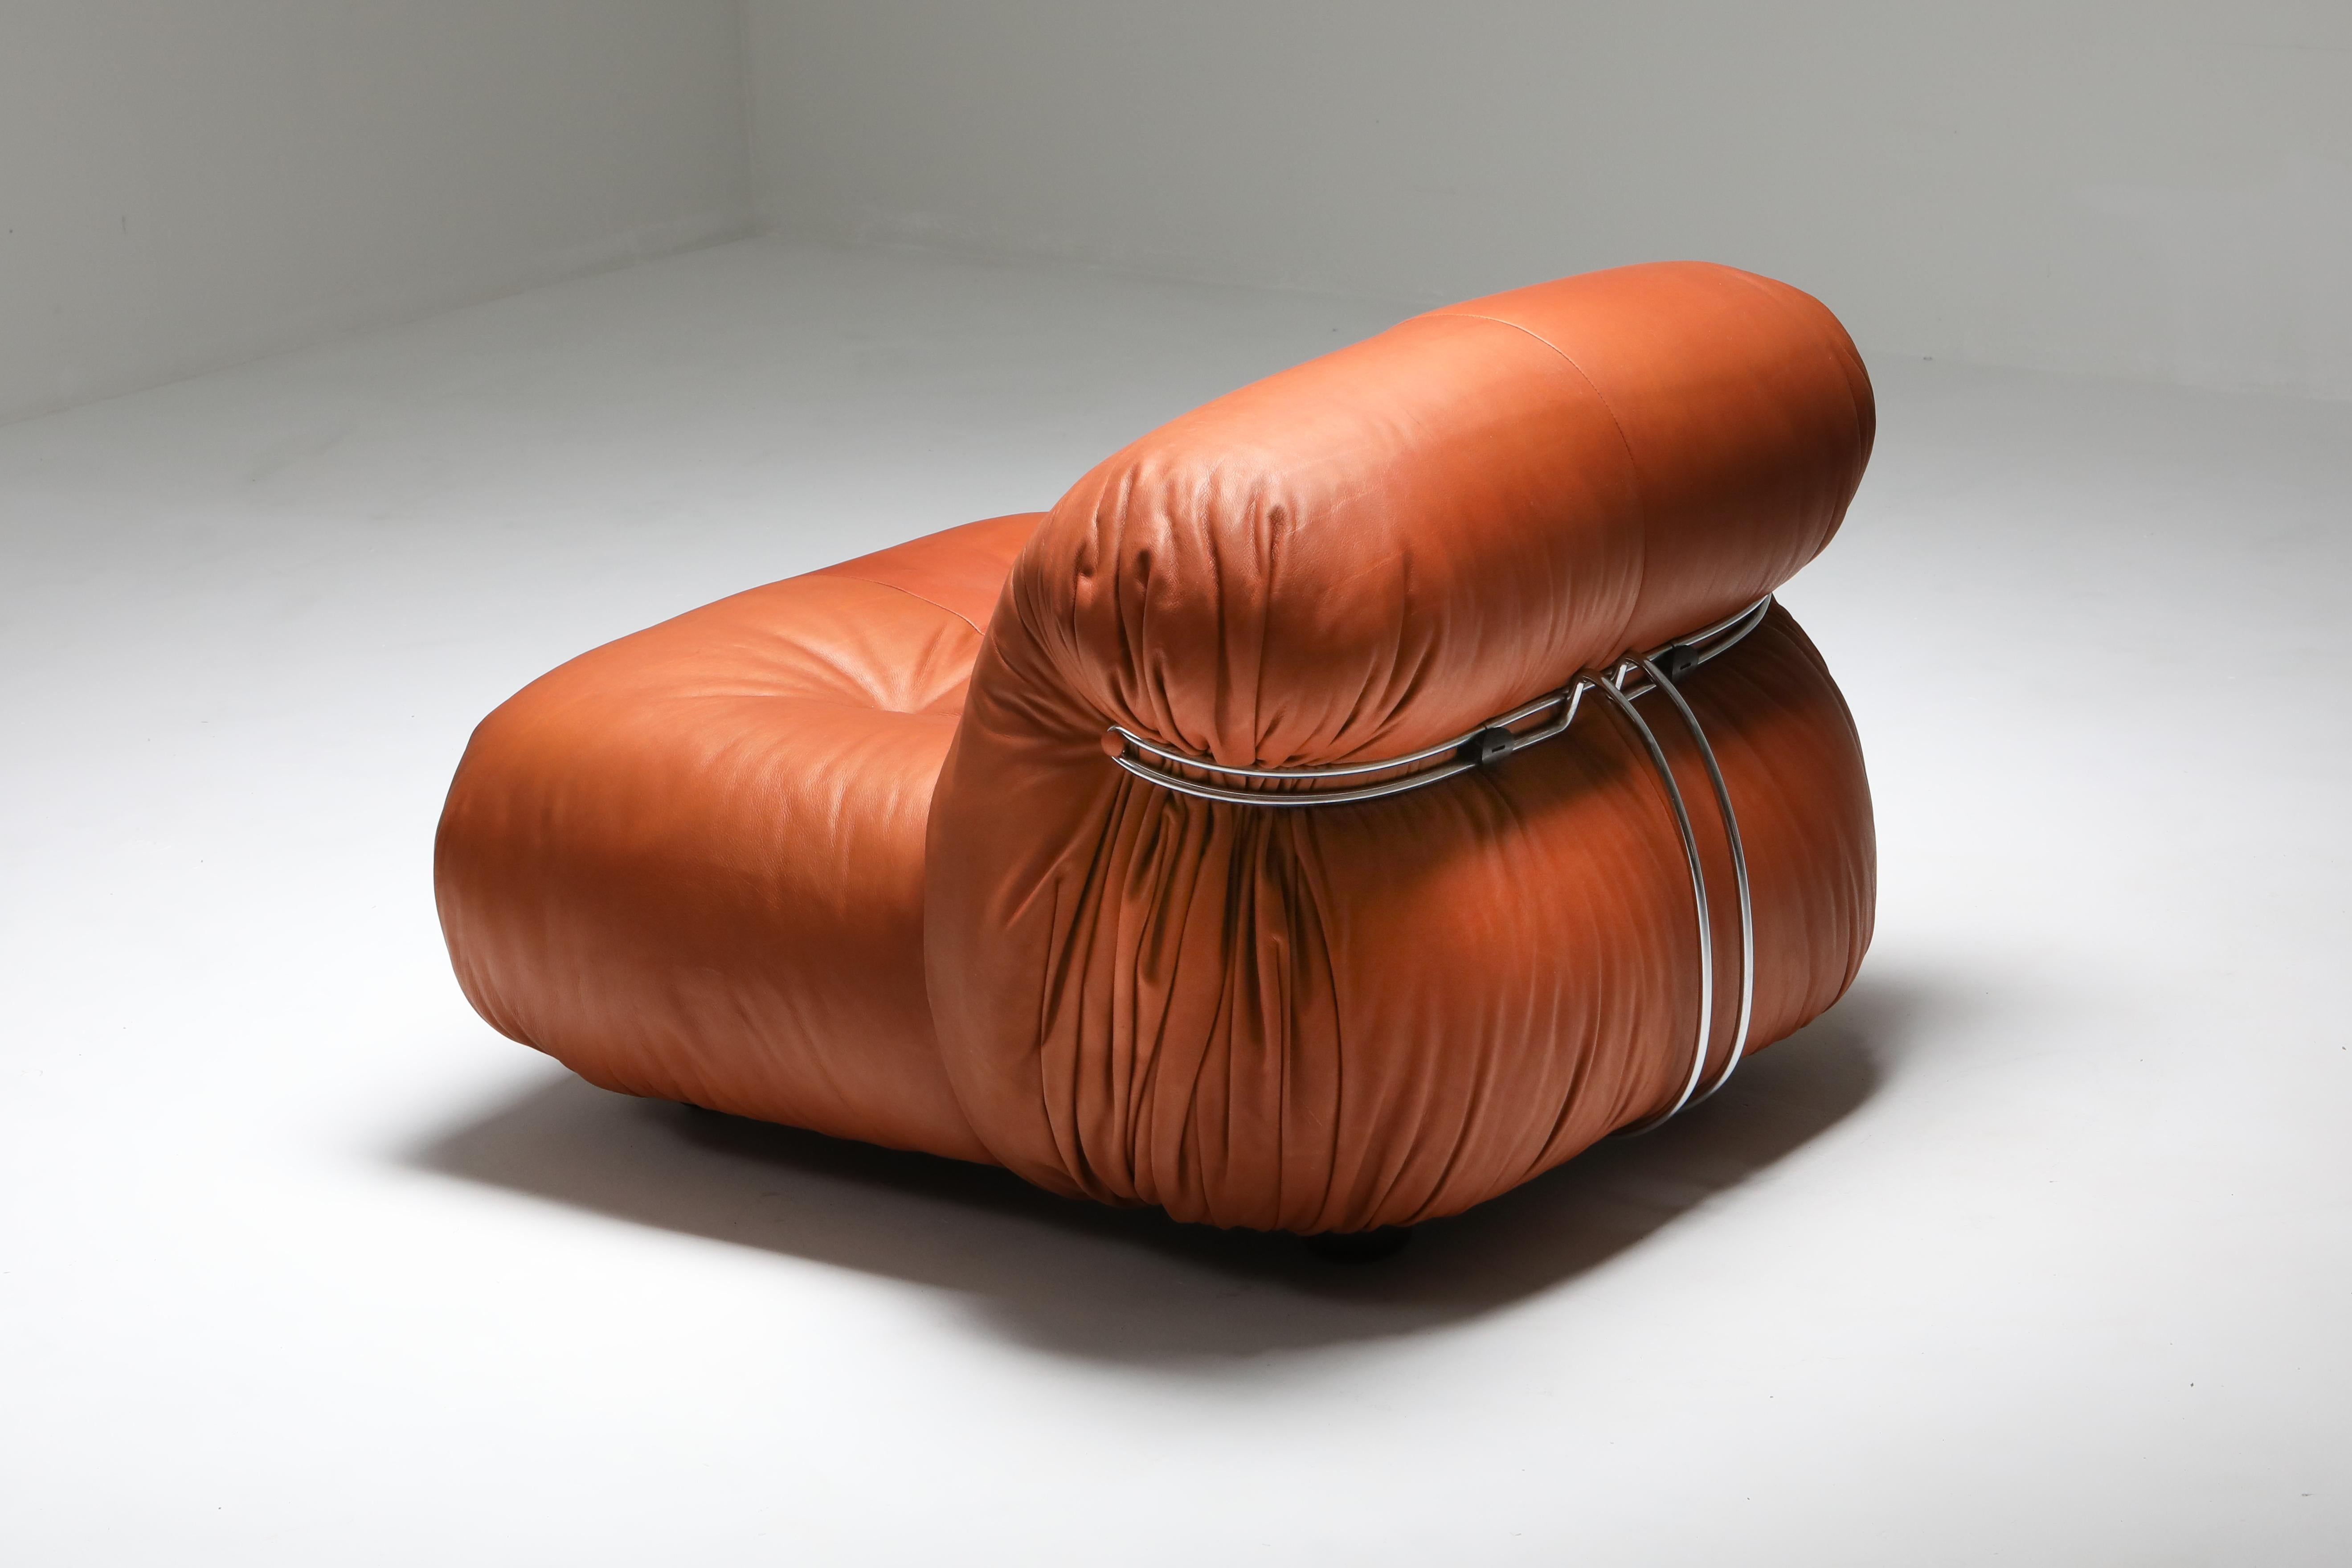 Afra and Tobia Scarpa, reupholstered cognac aniline leather, Cassina, Italy, 1970s
The Soriana collection was meant to express beauty and comfort by using a whole bundle of fabric held by a chrome-plated steel clamp.
The 